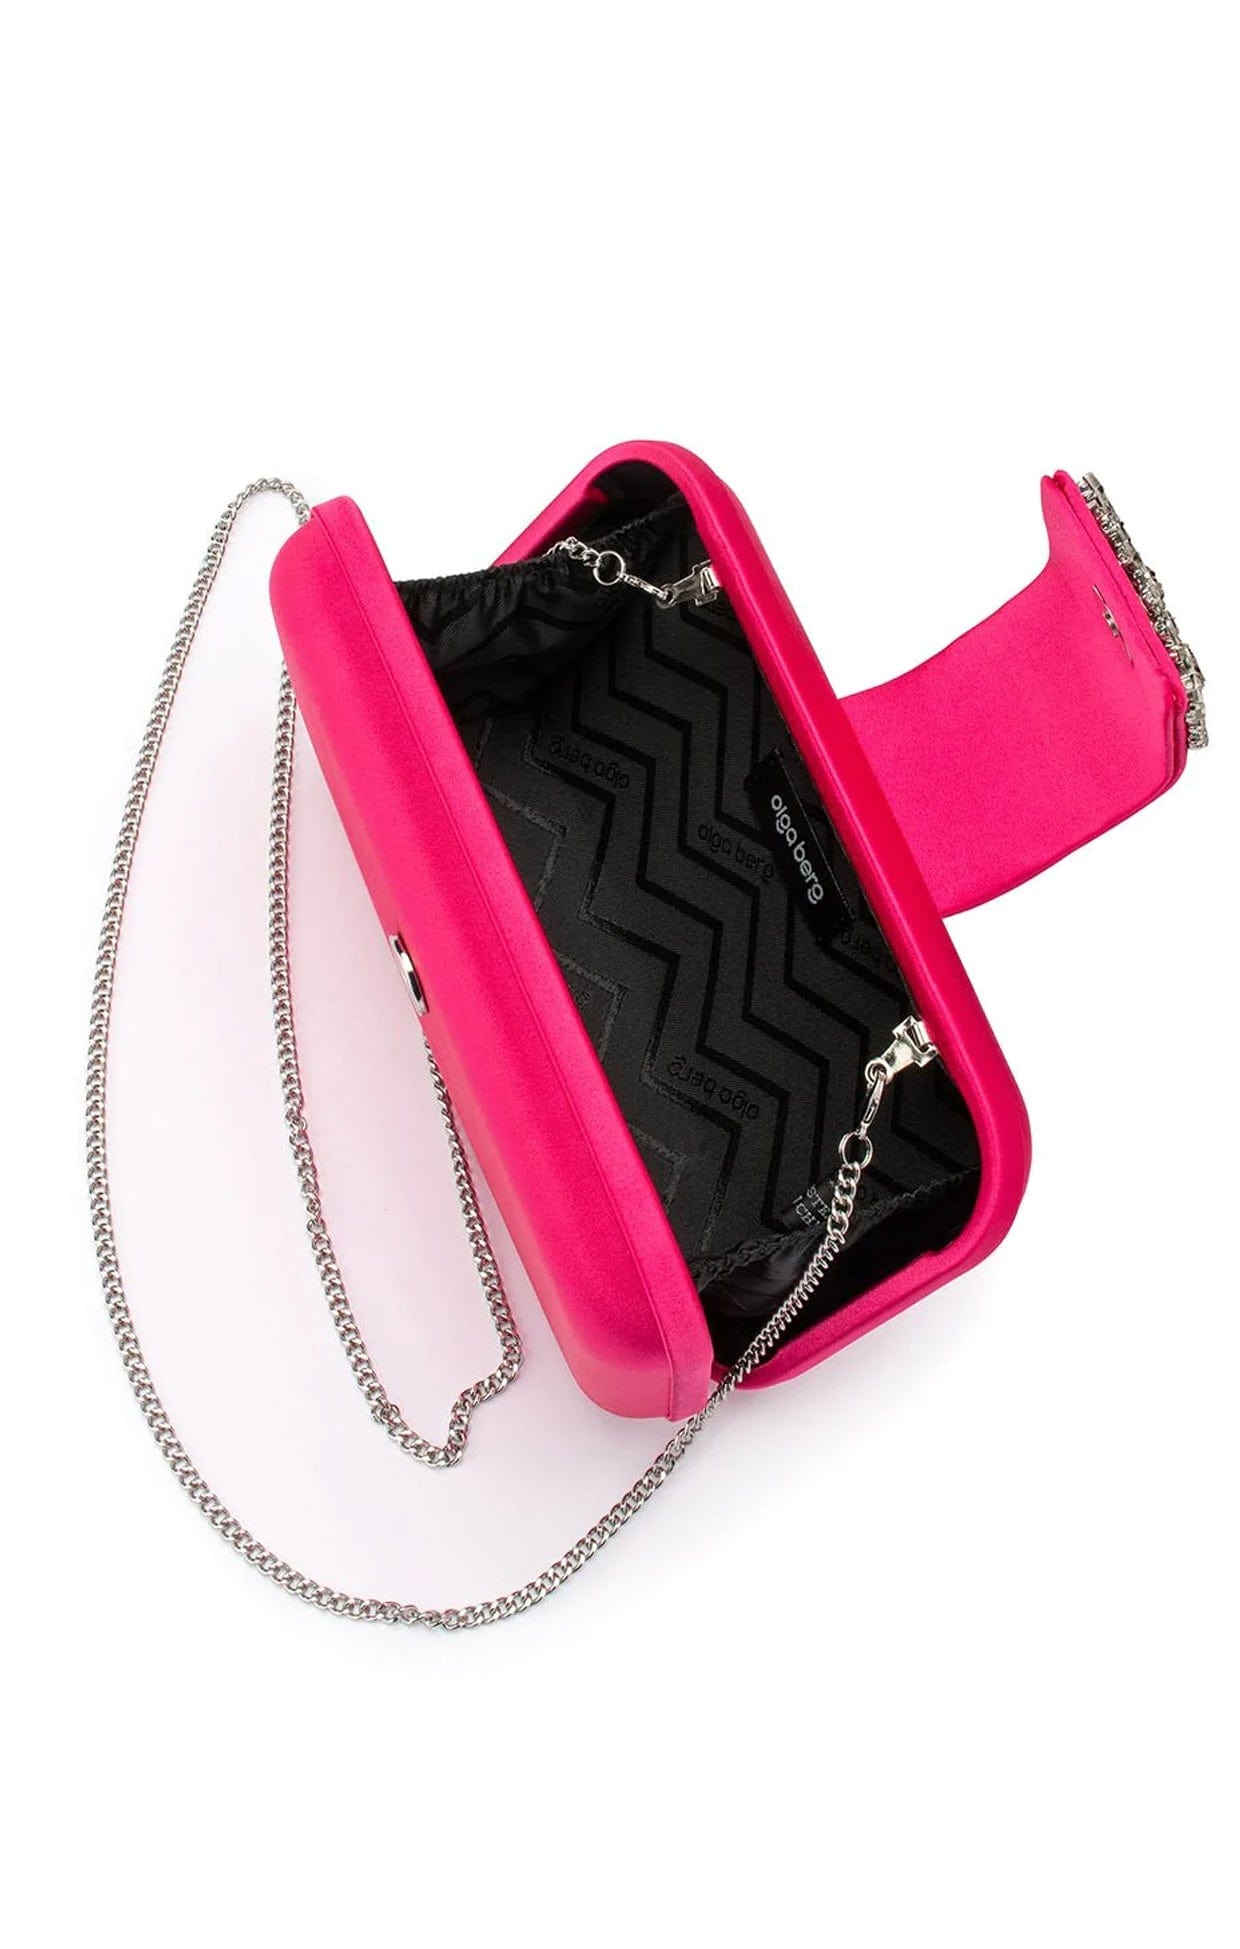 ACCESSORIES Bags Clutches One Size / Pink EMMY CRYSTAL TRIM CLUTCH IN FUCHSIA